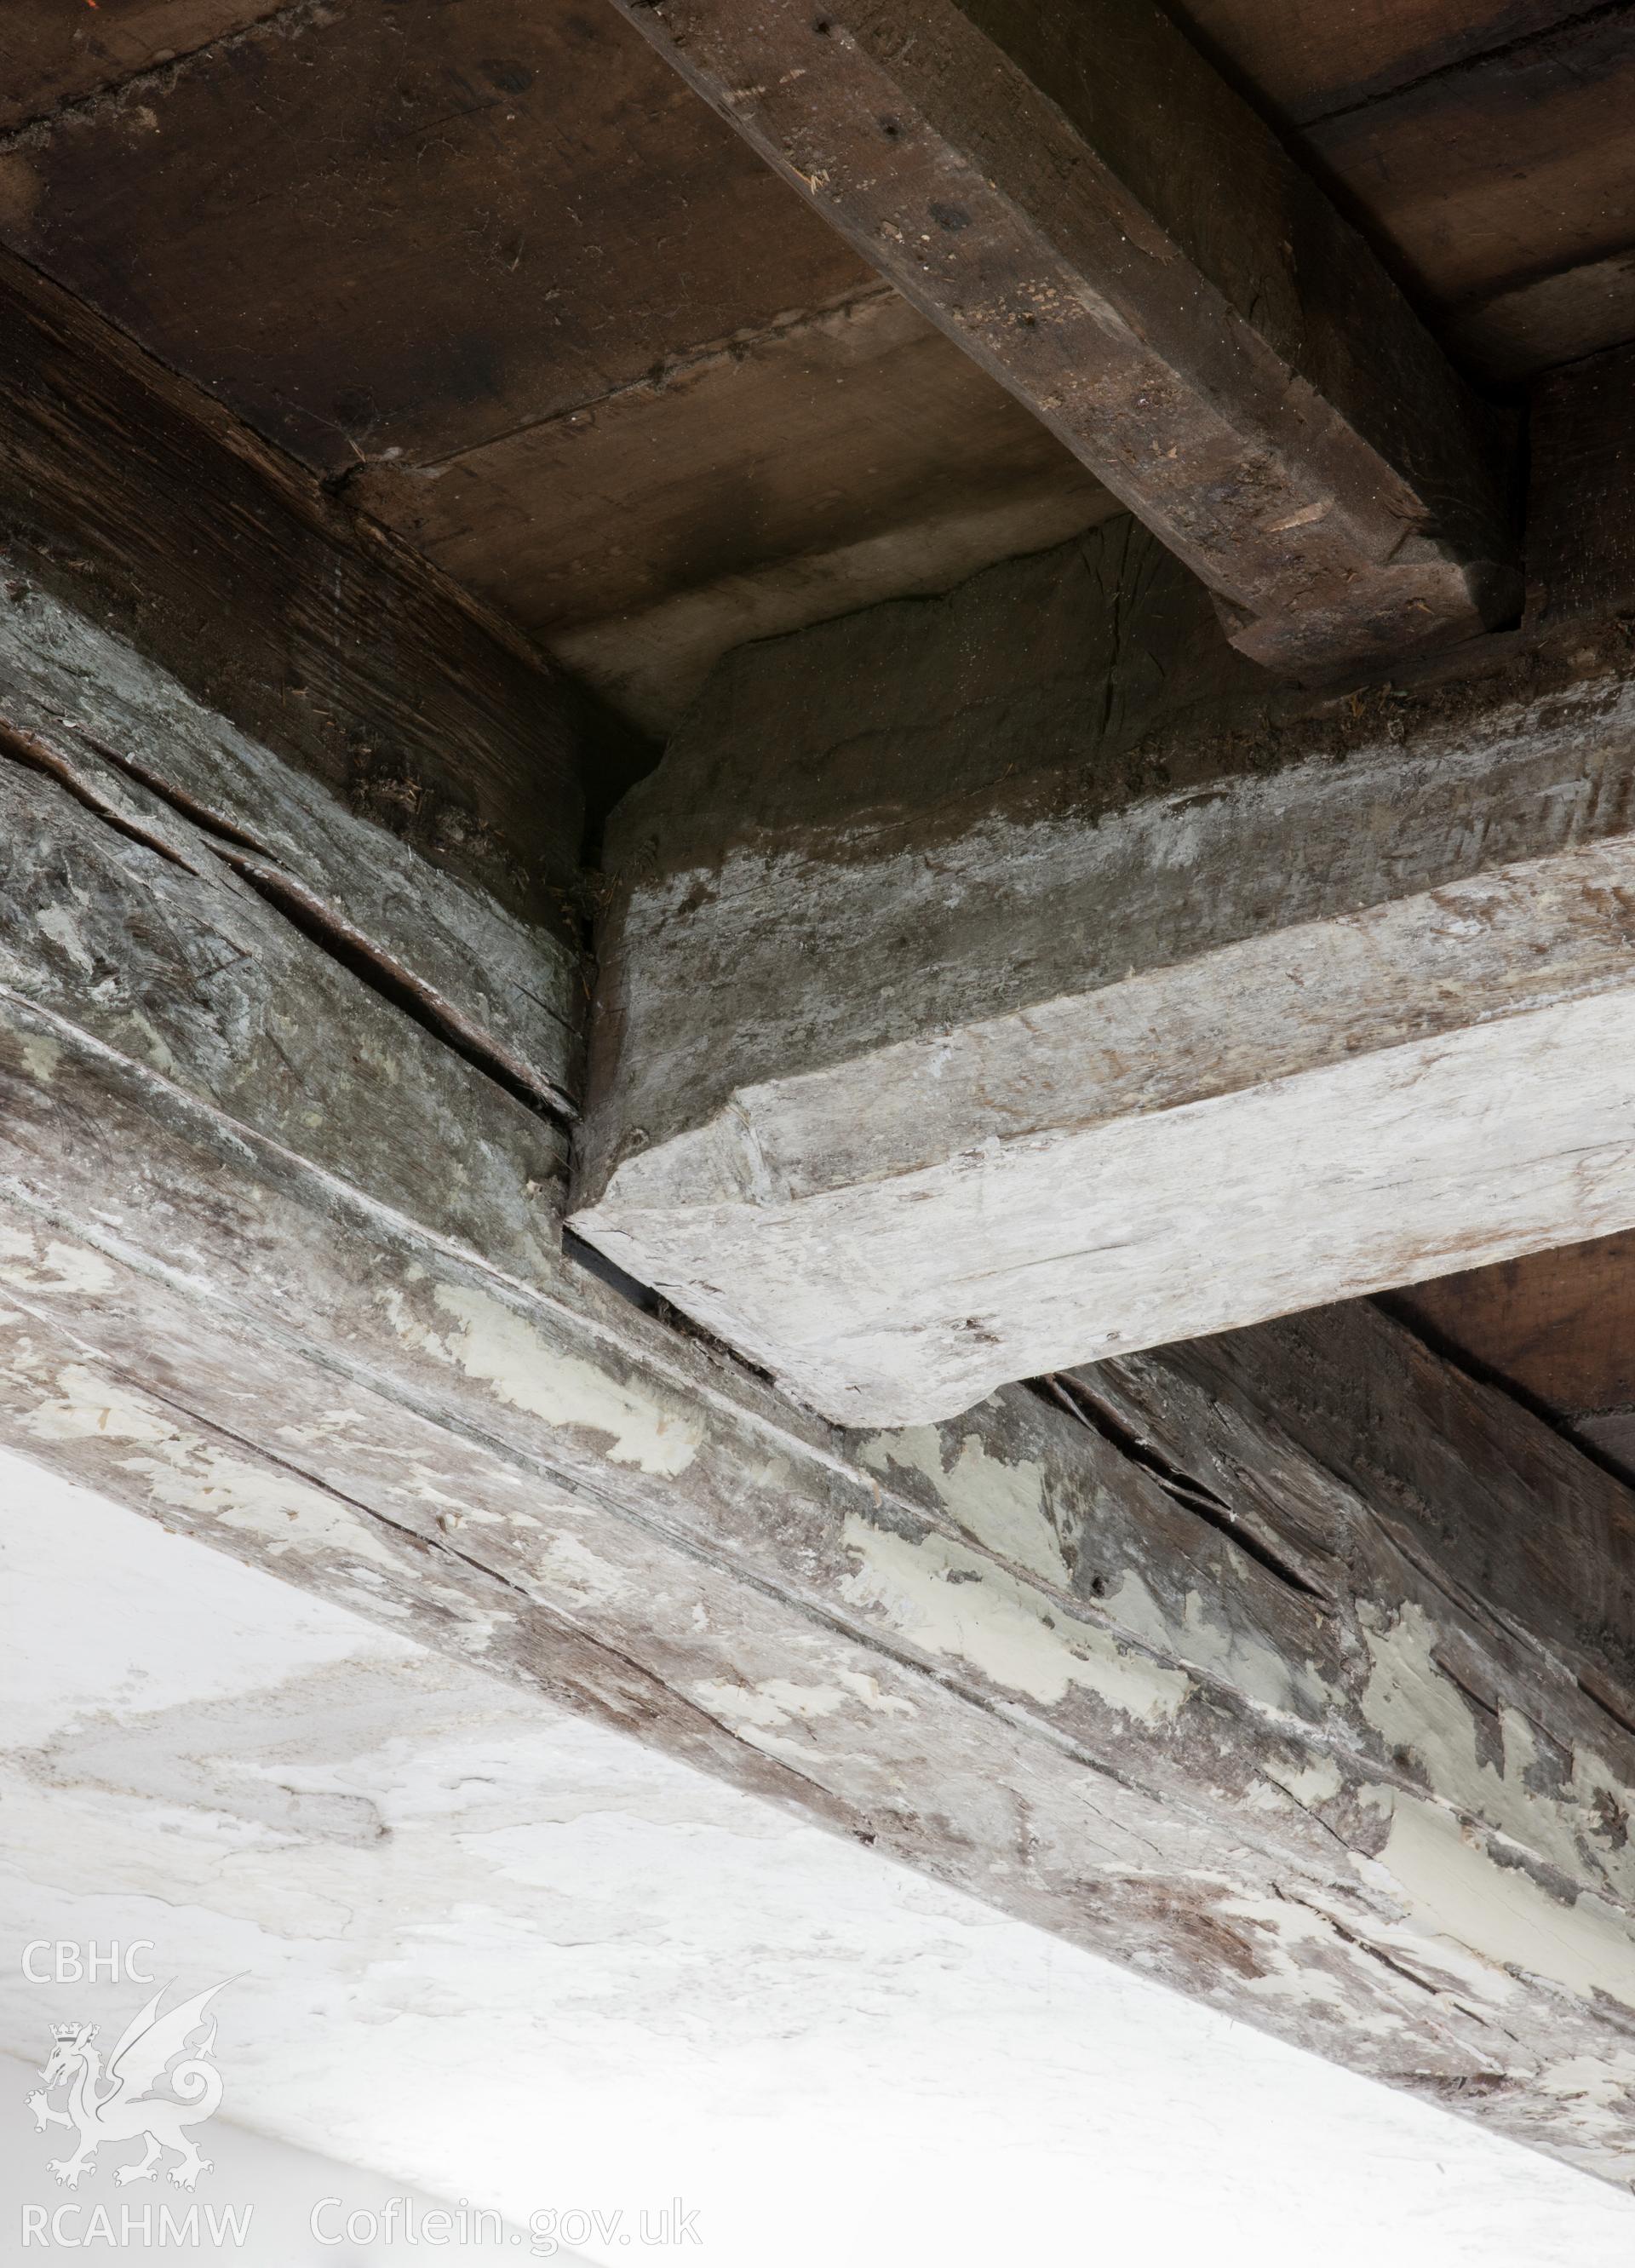 Main chamber, detail of ceiling timbers.